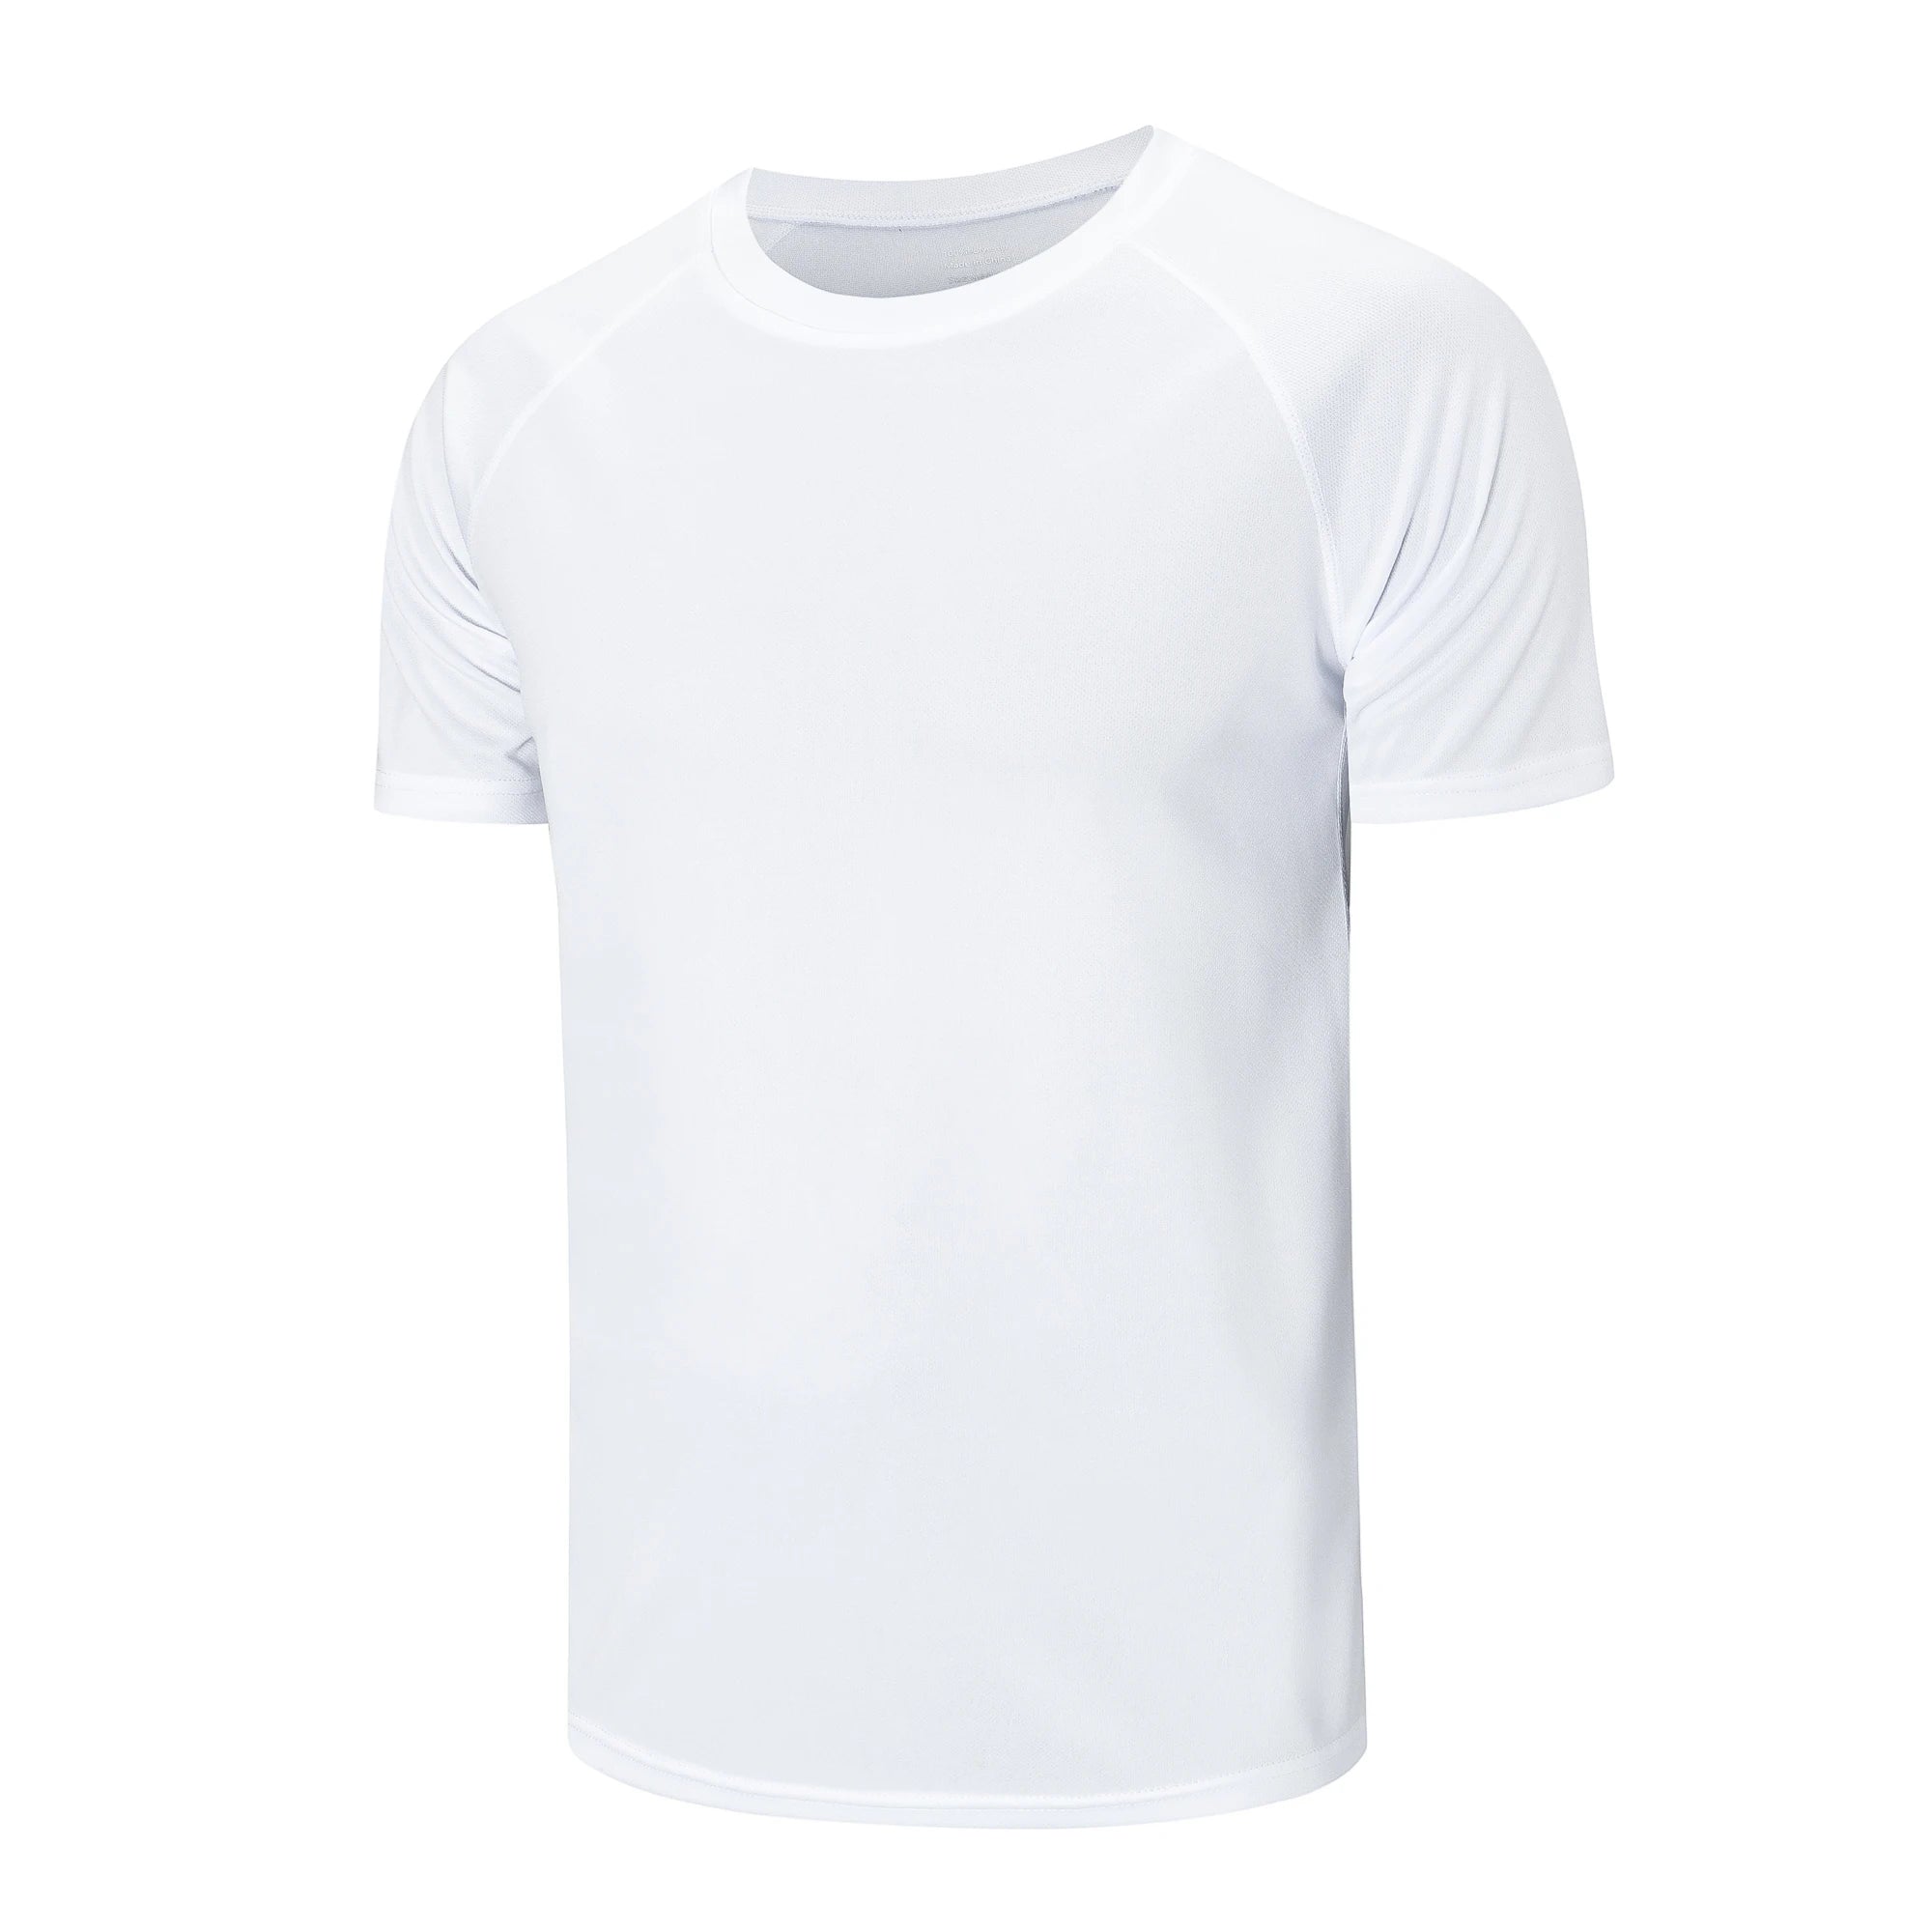 Gympower Training T-shirt - Gympower